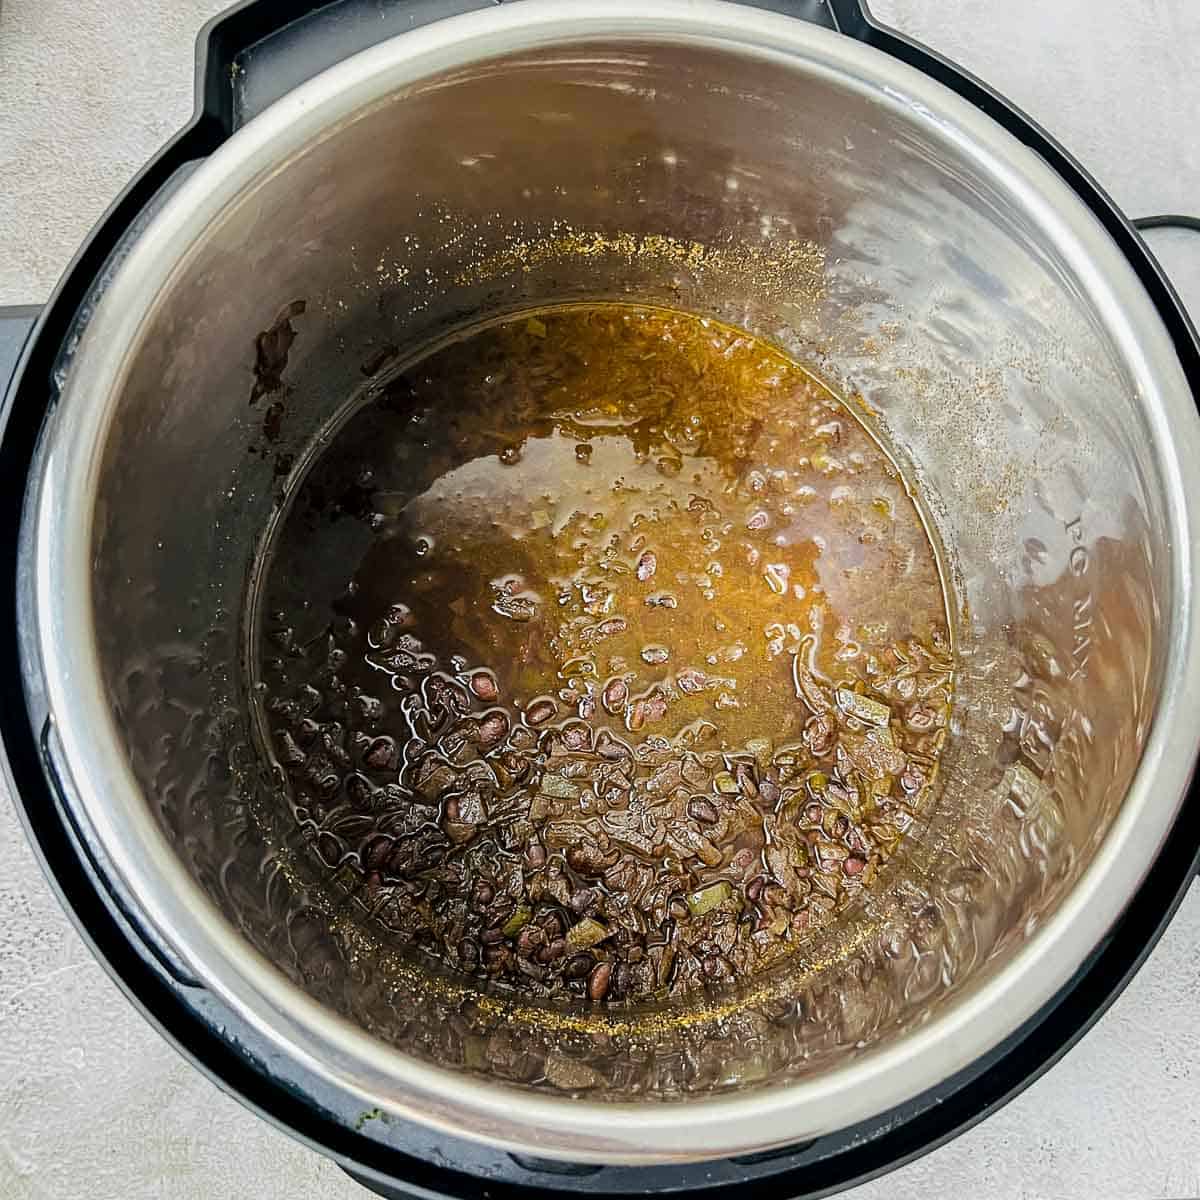 Pressure cooked beans in Instant Pot.